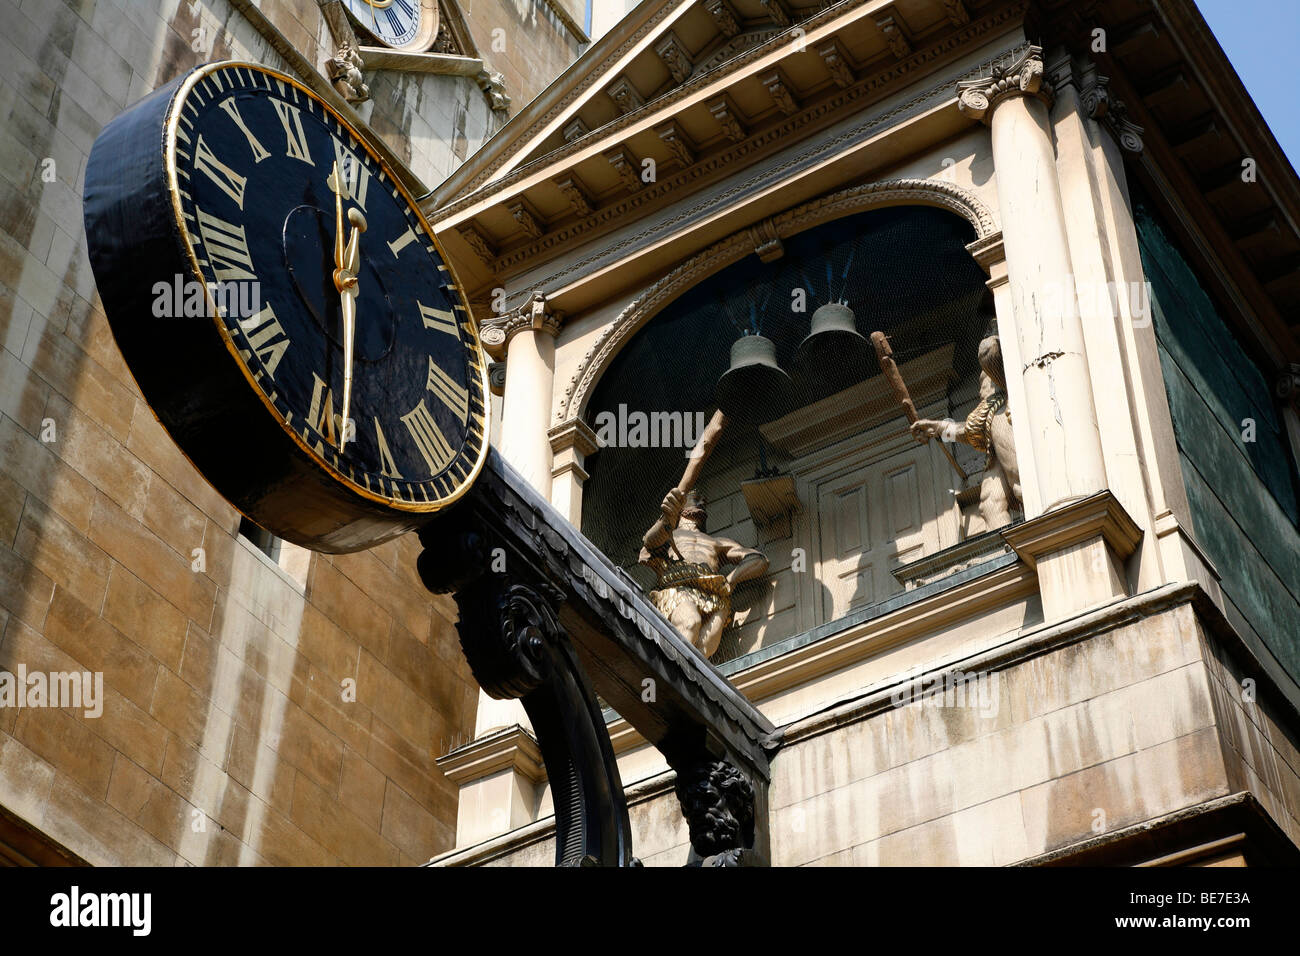 Gog and Magog bell ringers and clock of St Dunstan in the West, Fleet Street, London, UK Stock Photo